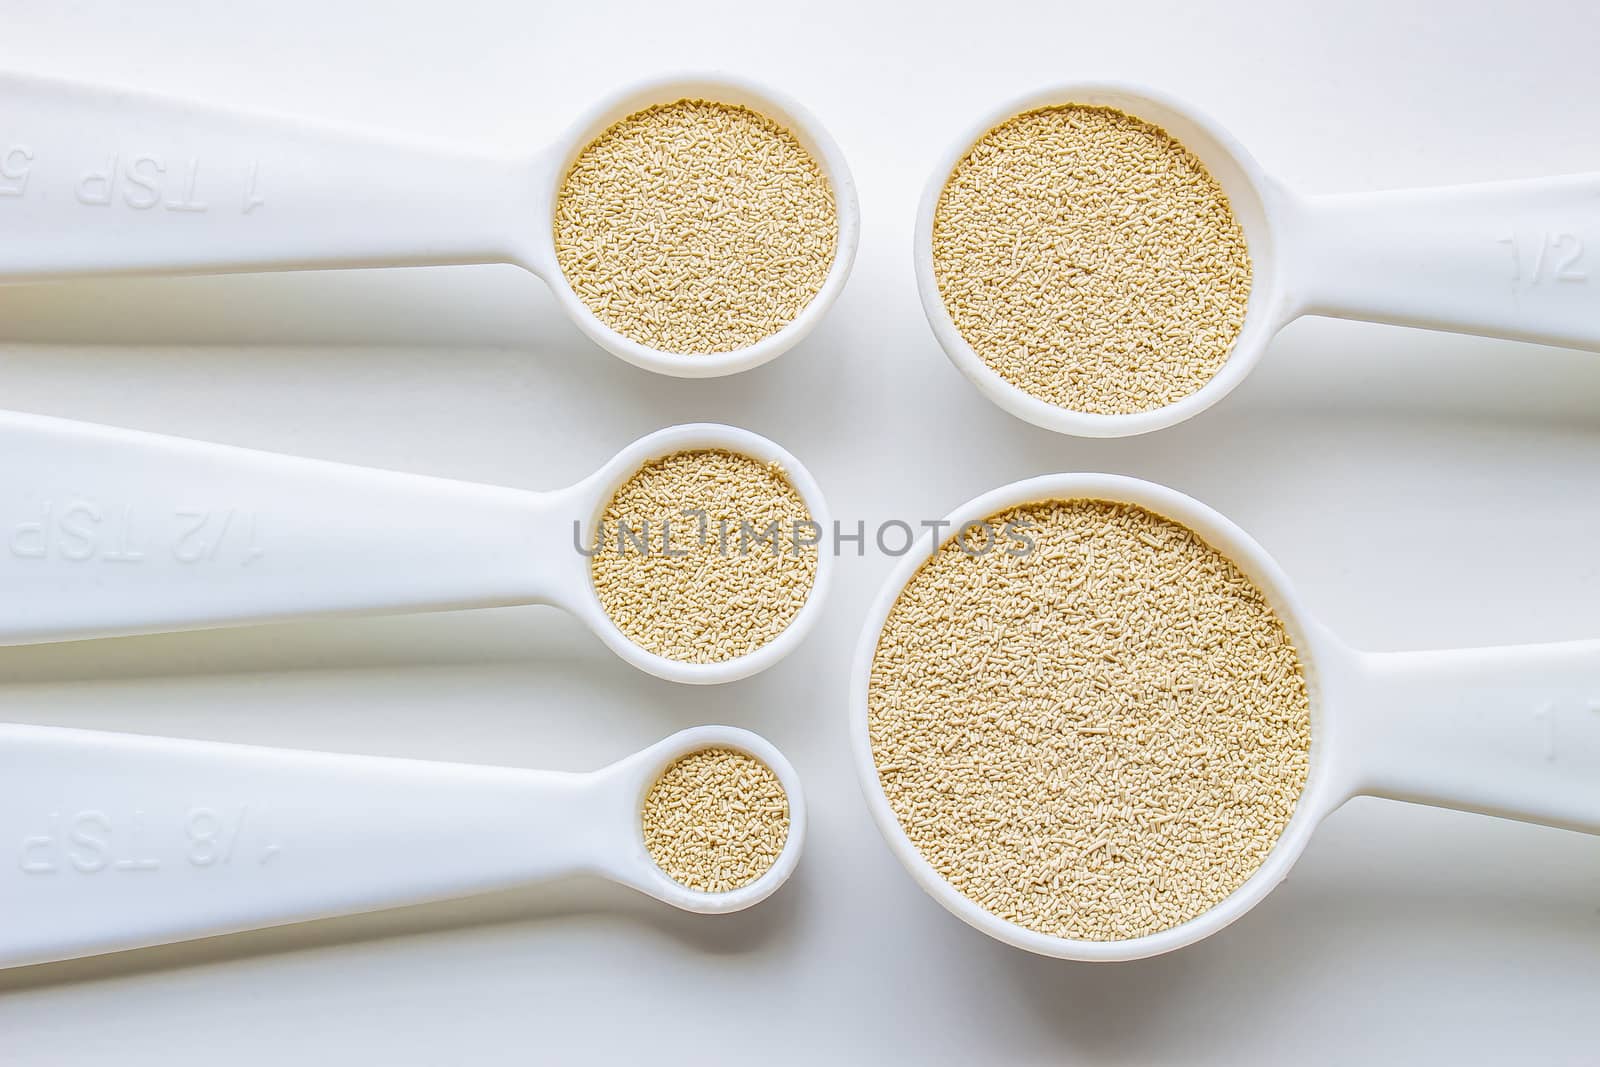 A close view of some measurement baking spoons with yeast on them by oasisamuel